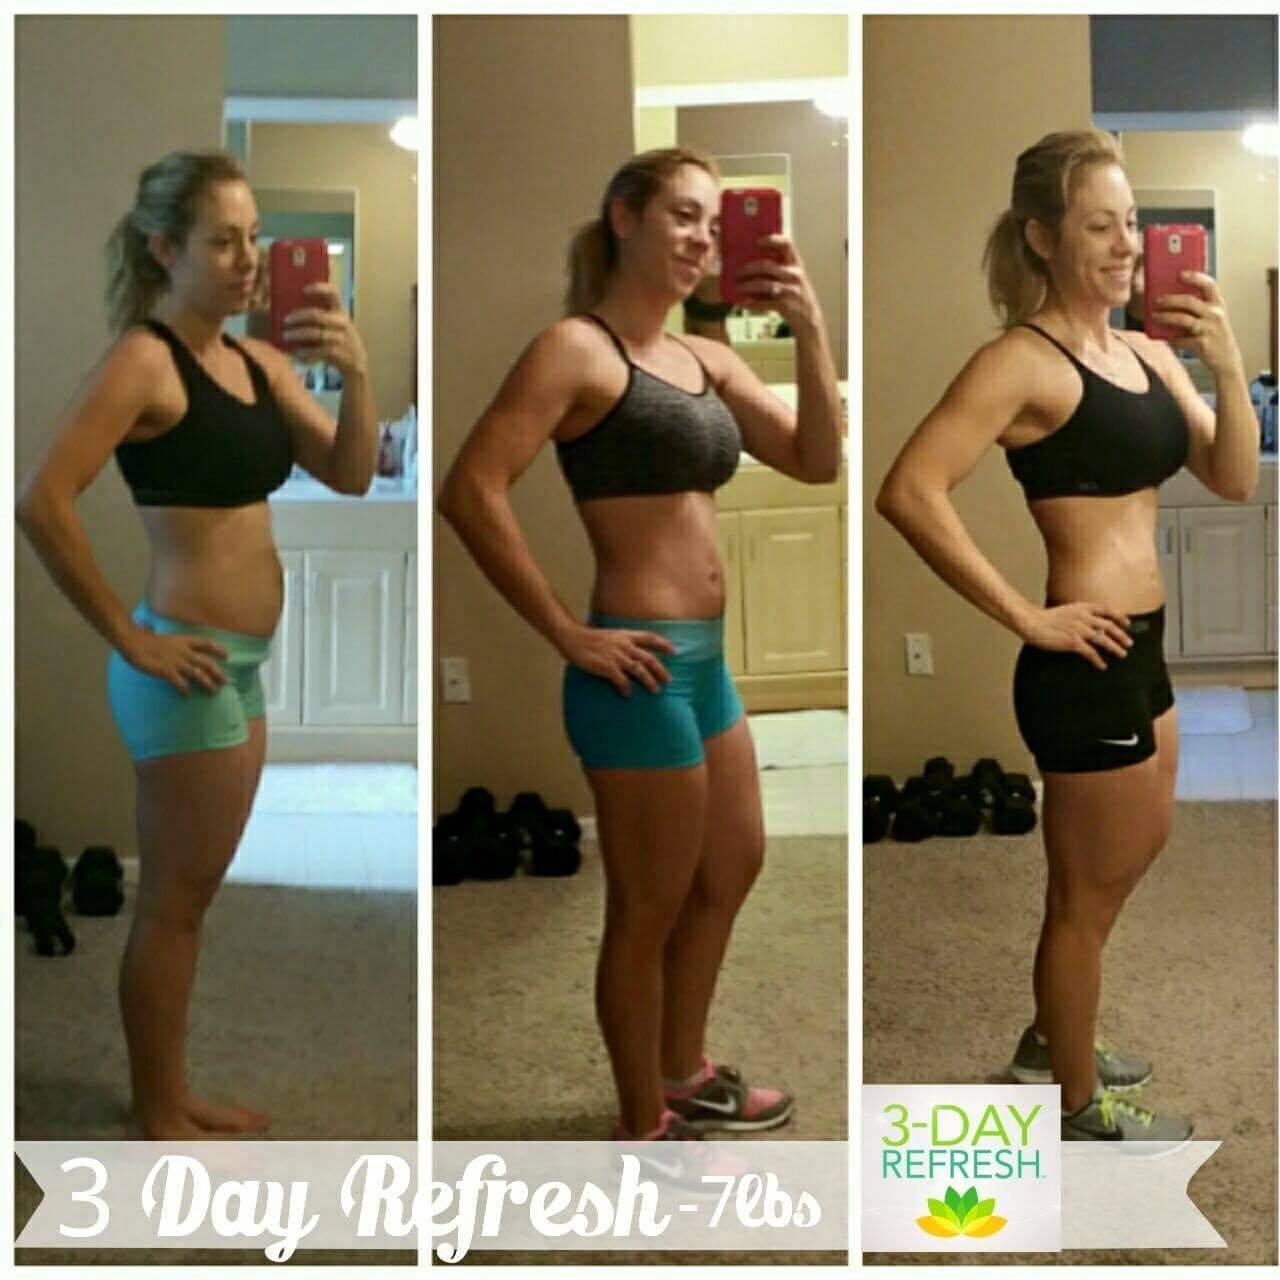 beachbody 3-day refresh results, down 7 pounds